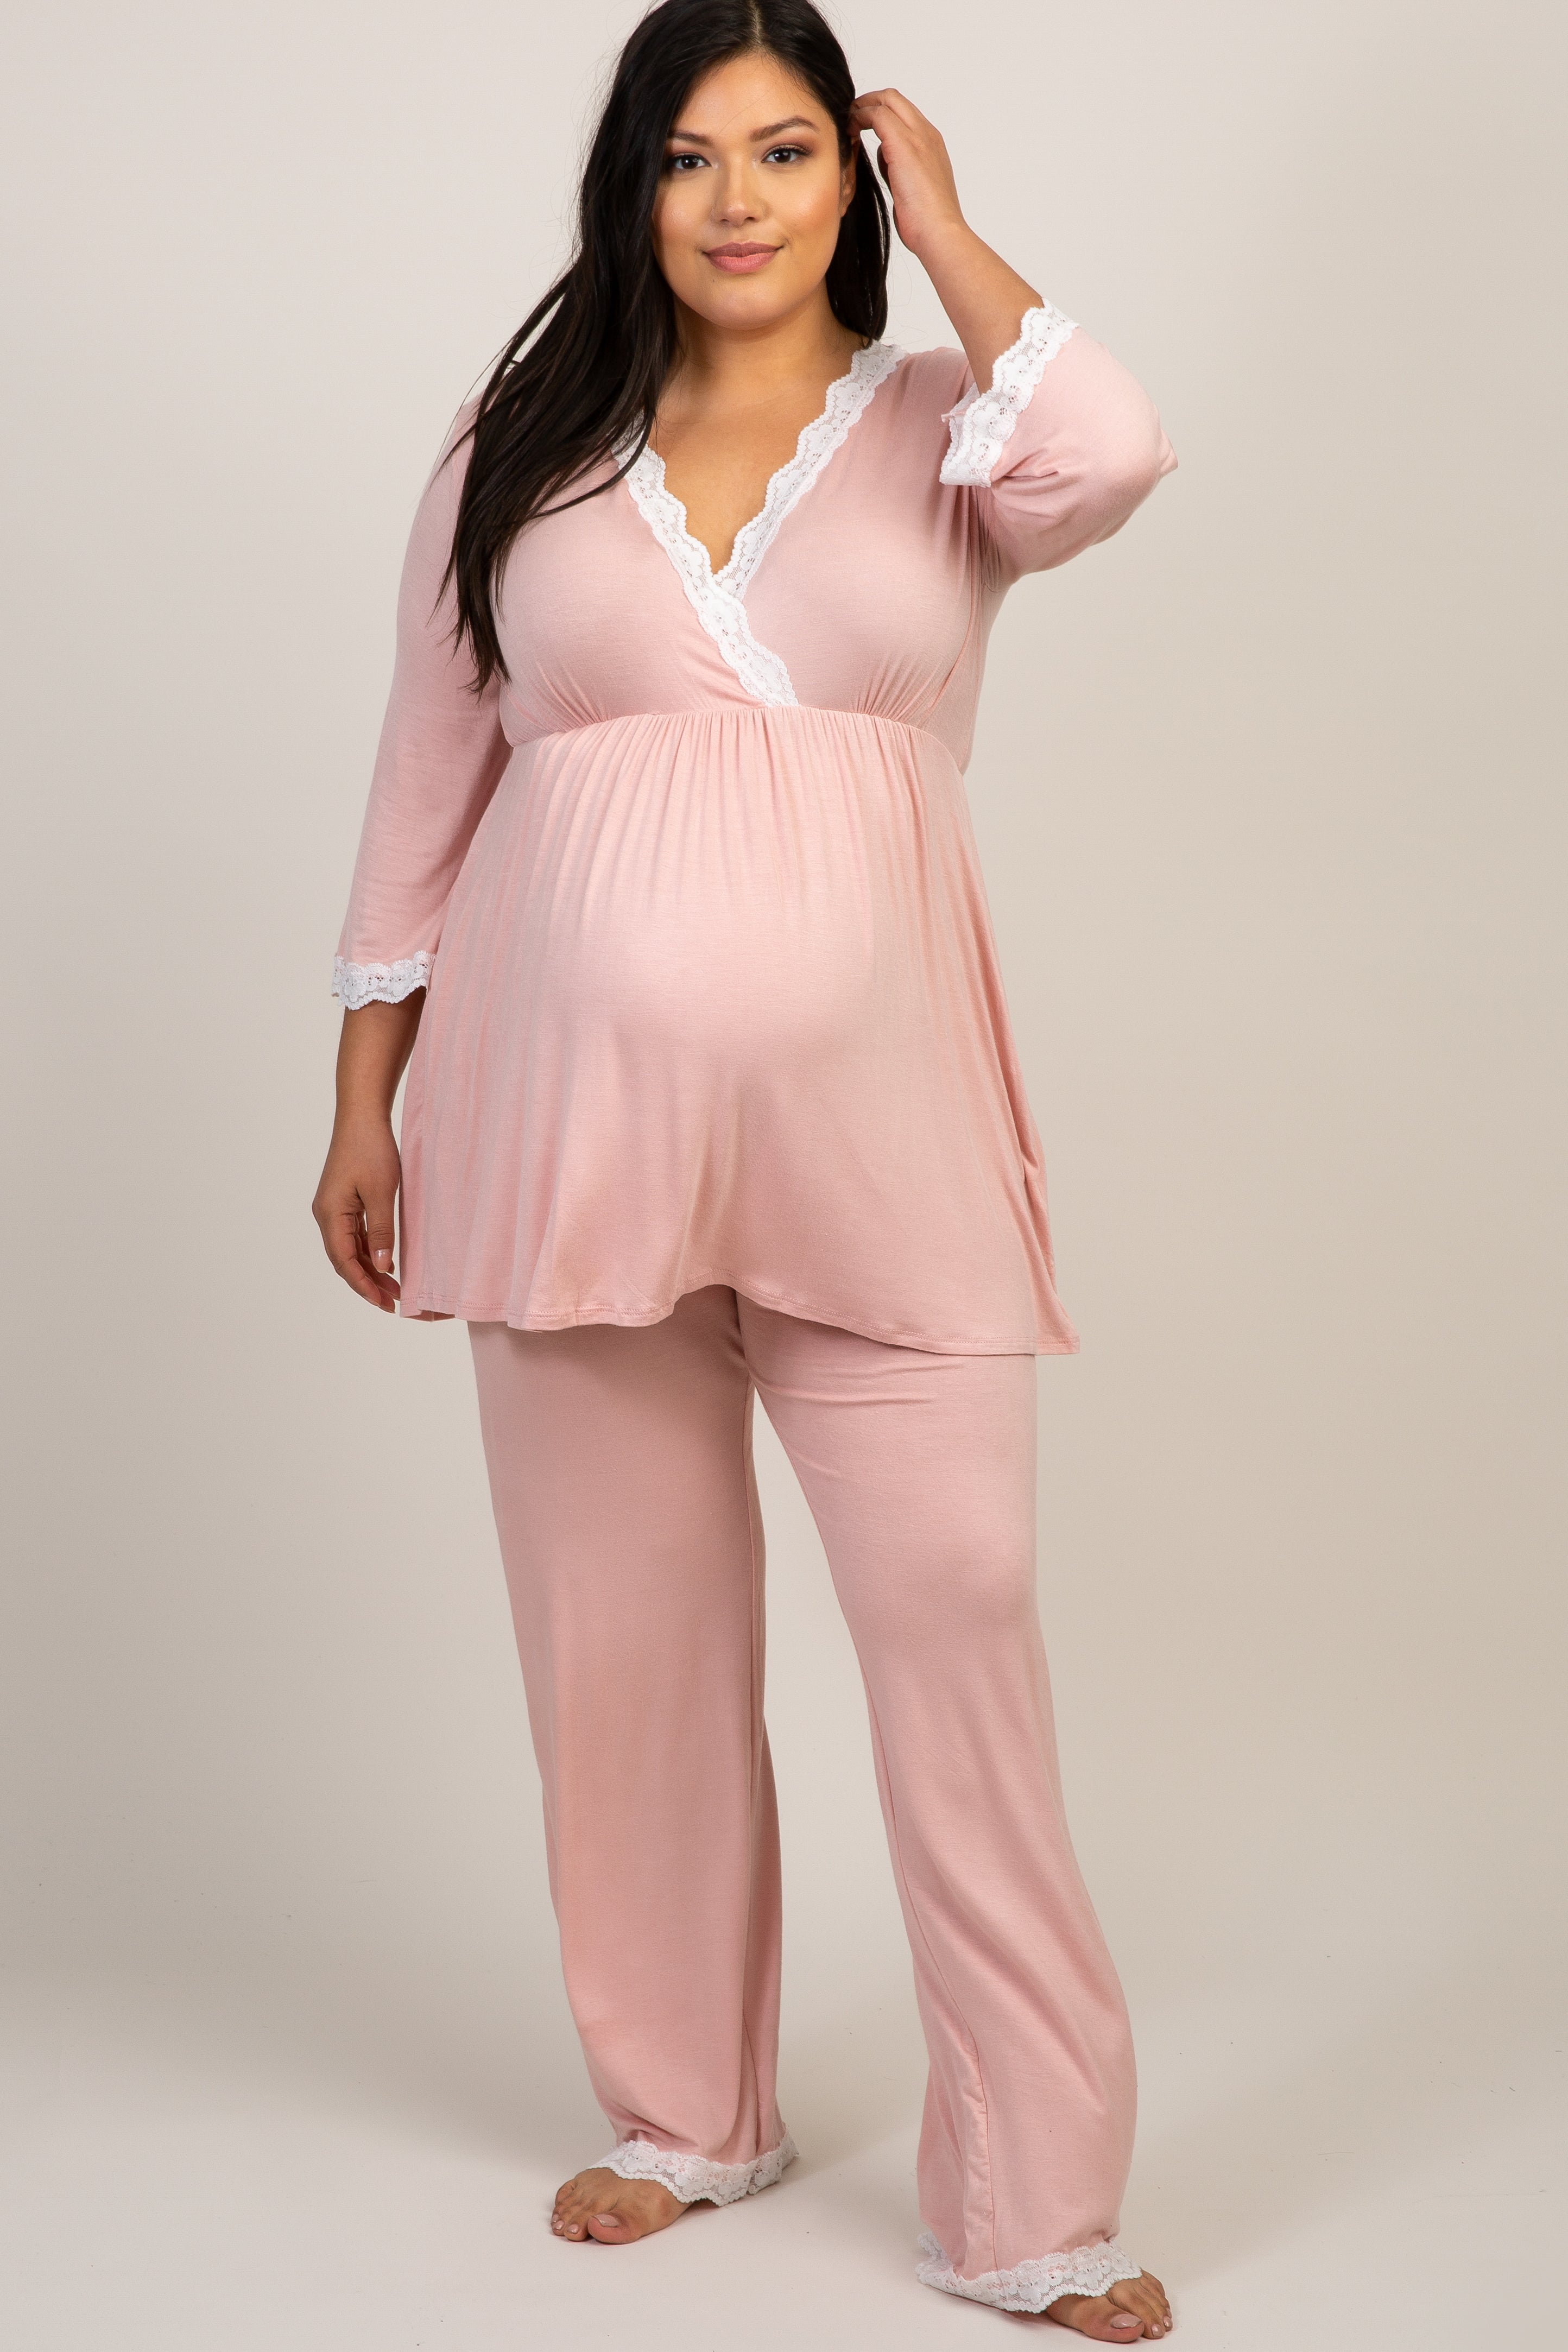 Grace Hospital Birthing Gown/Night Dress with Nursing Access - Pink